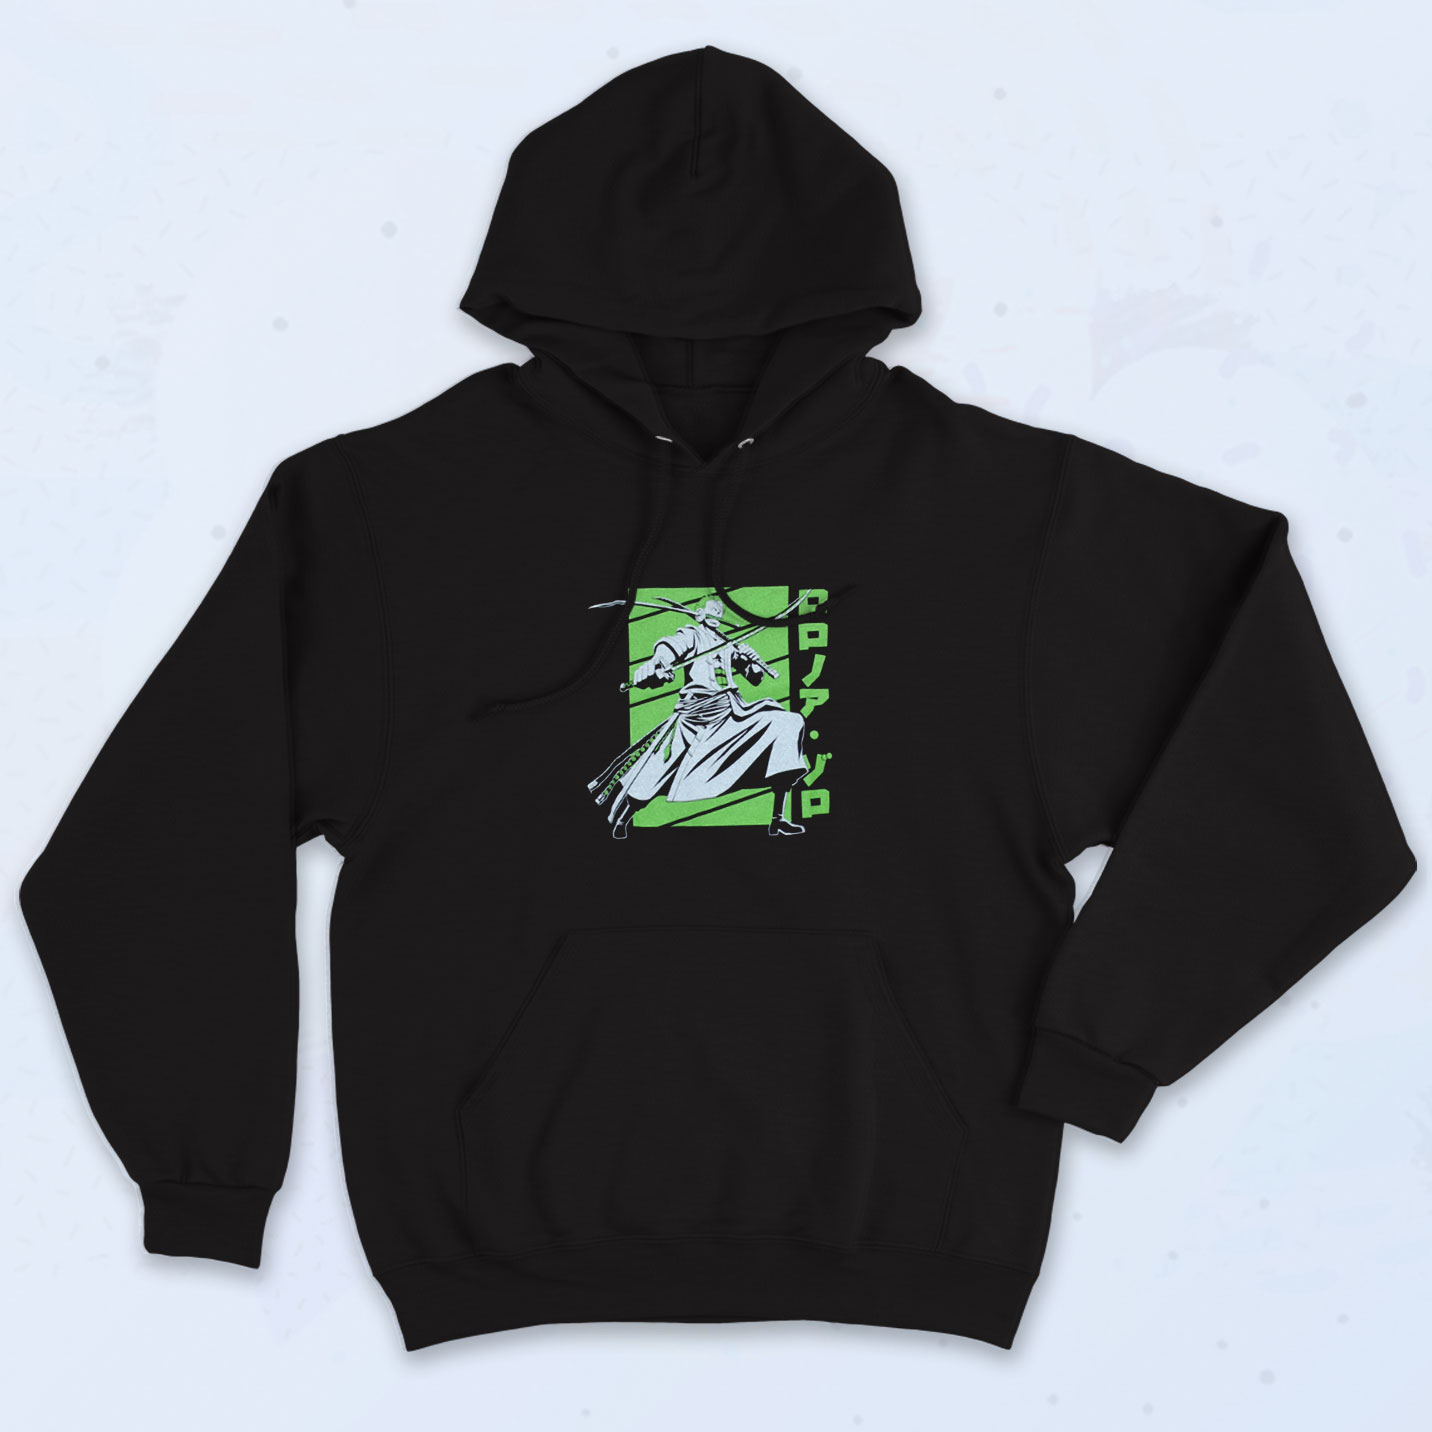 Zoro Posed on Green Kanji Graphic Hoodie - 90sclothes.com